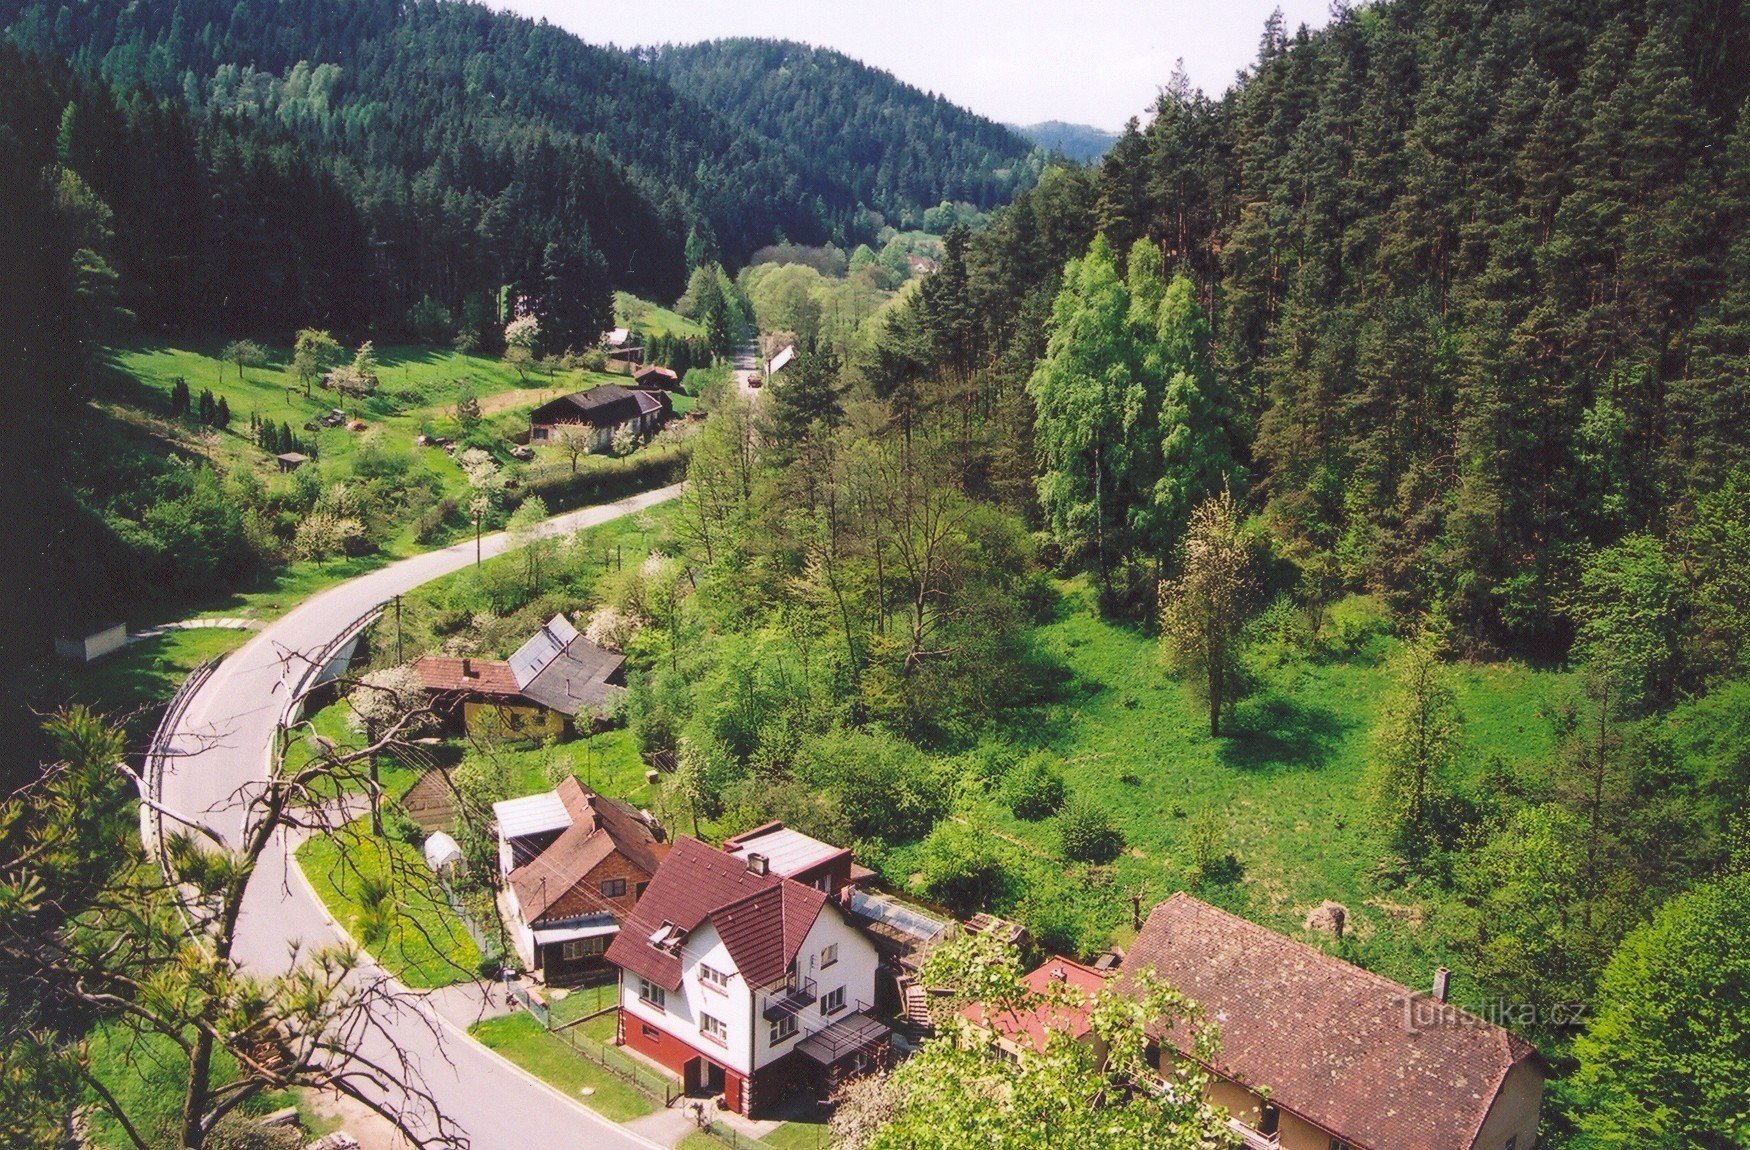 View from the viewpoint of the Křetínka valley